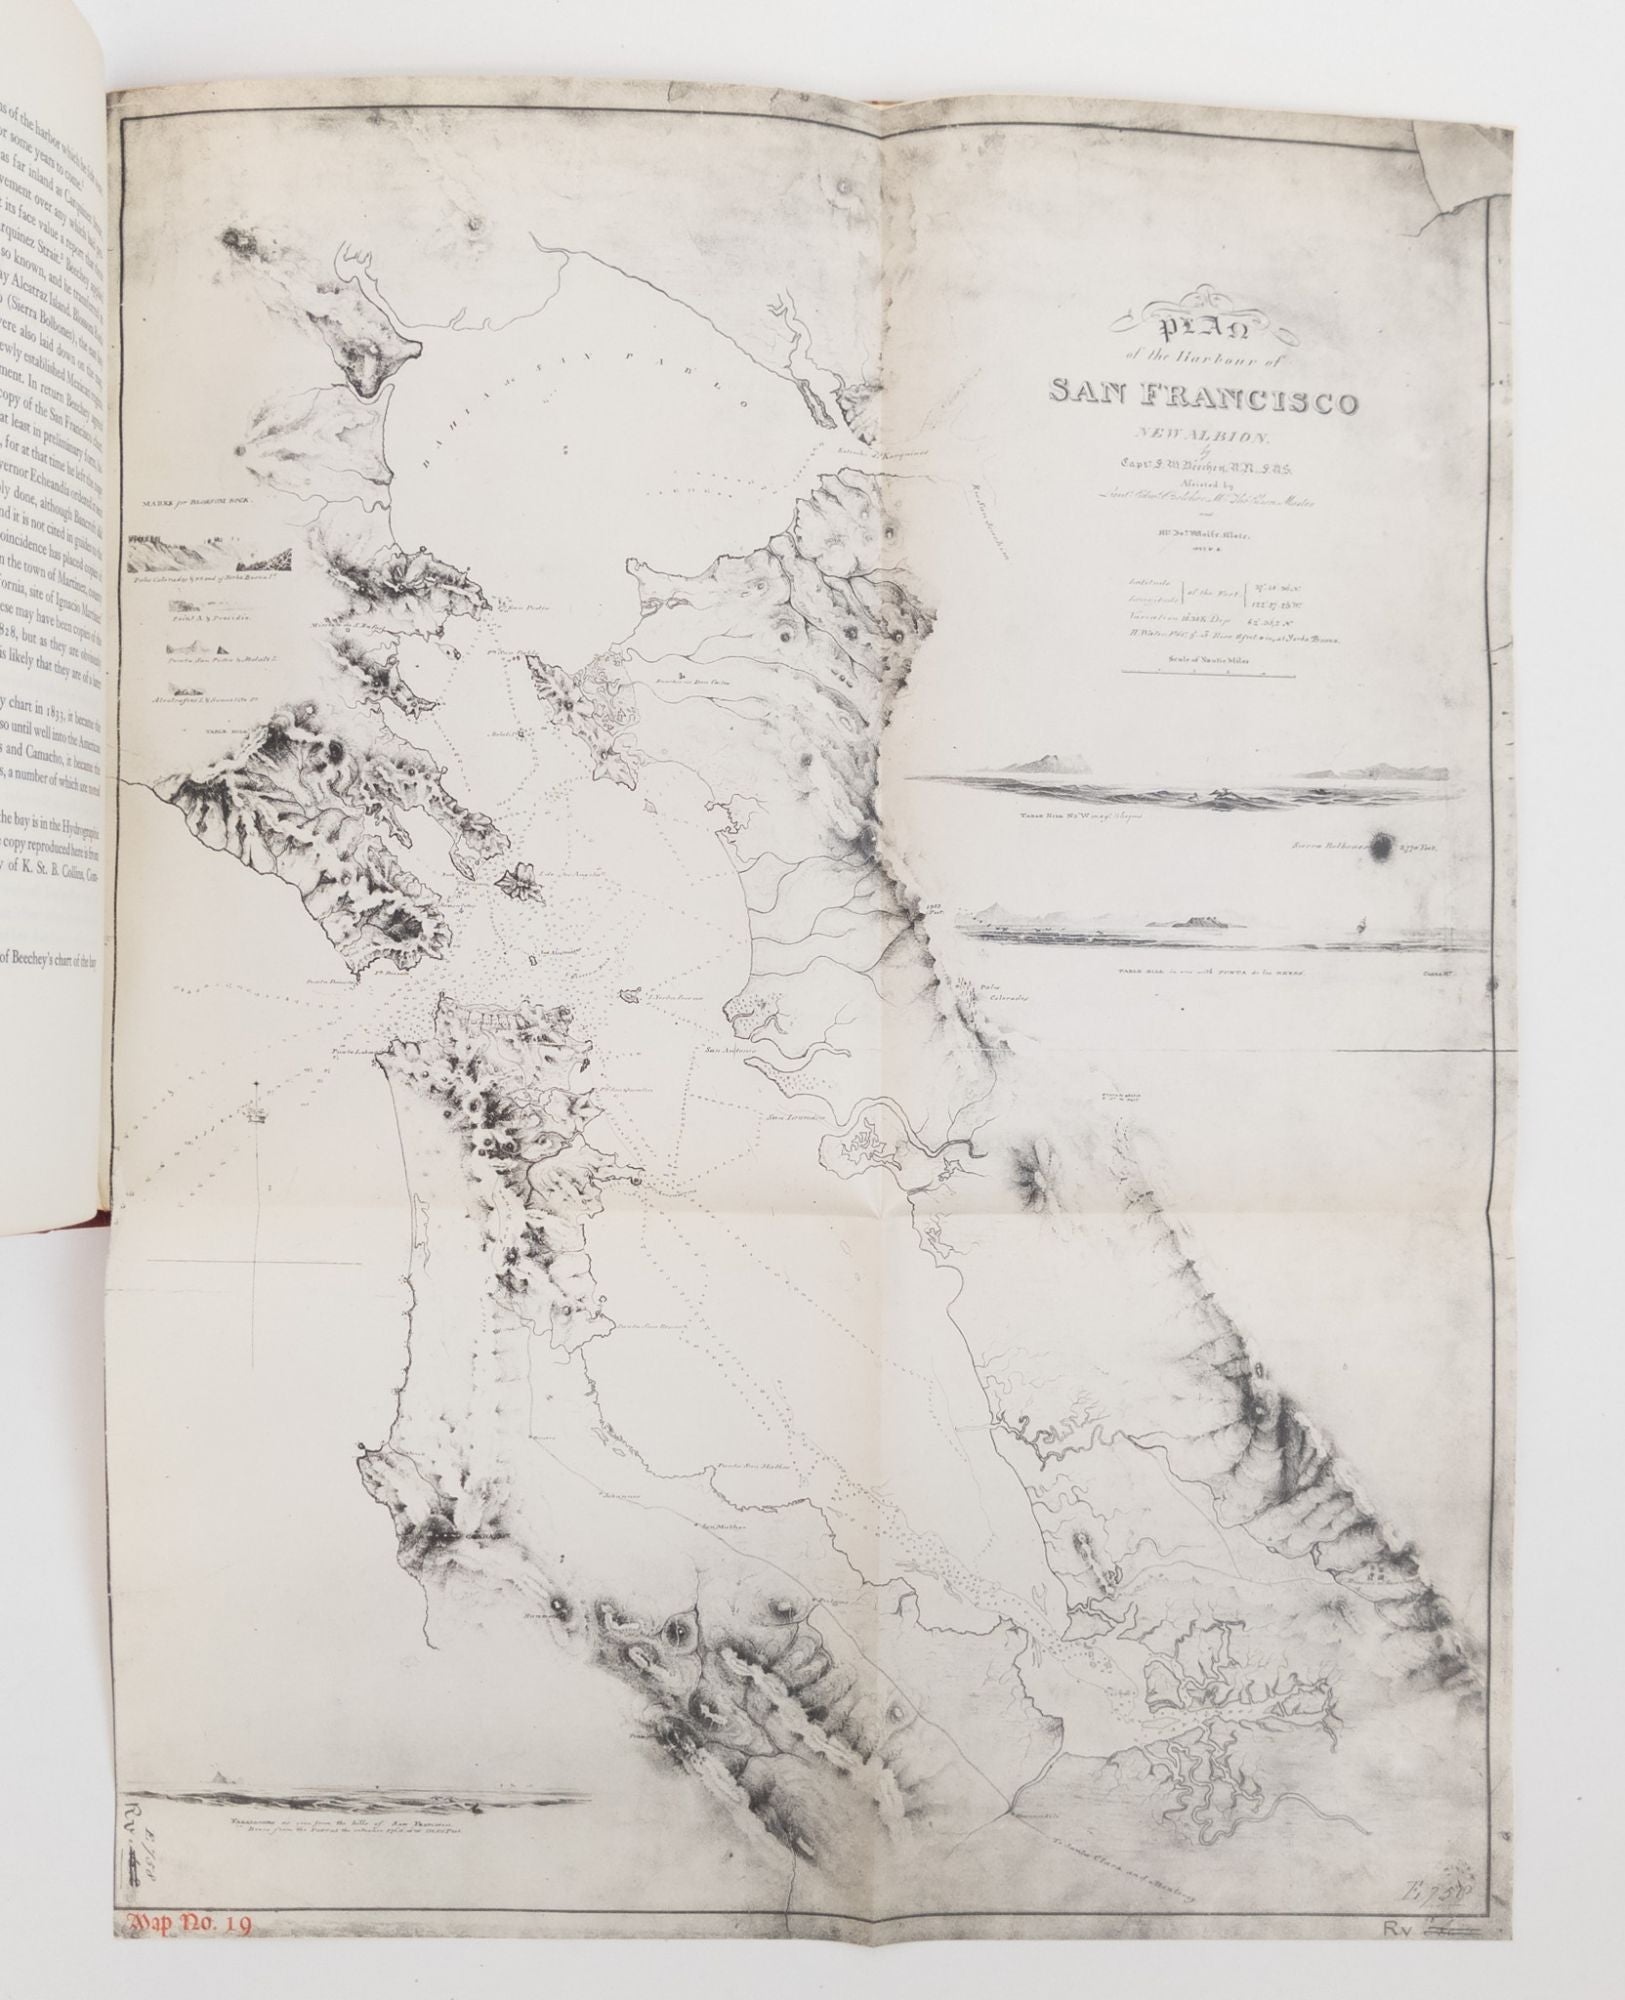 Product Image for MAPS OF SAN FRANCISCO BAY FROM THE SPANISH DISCOVERY